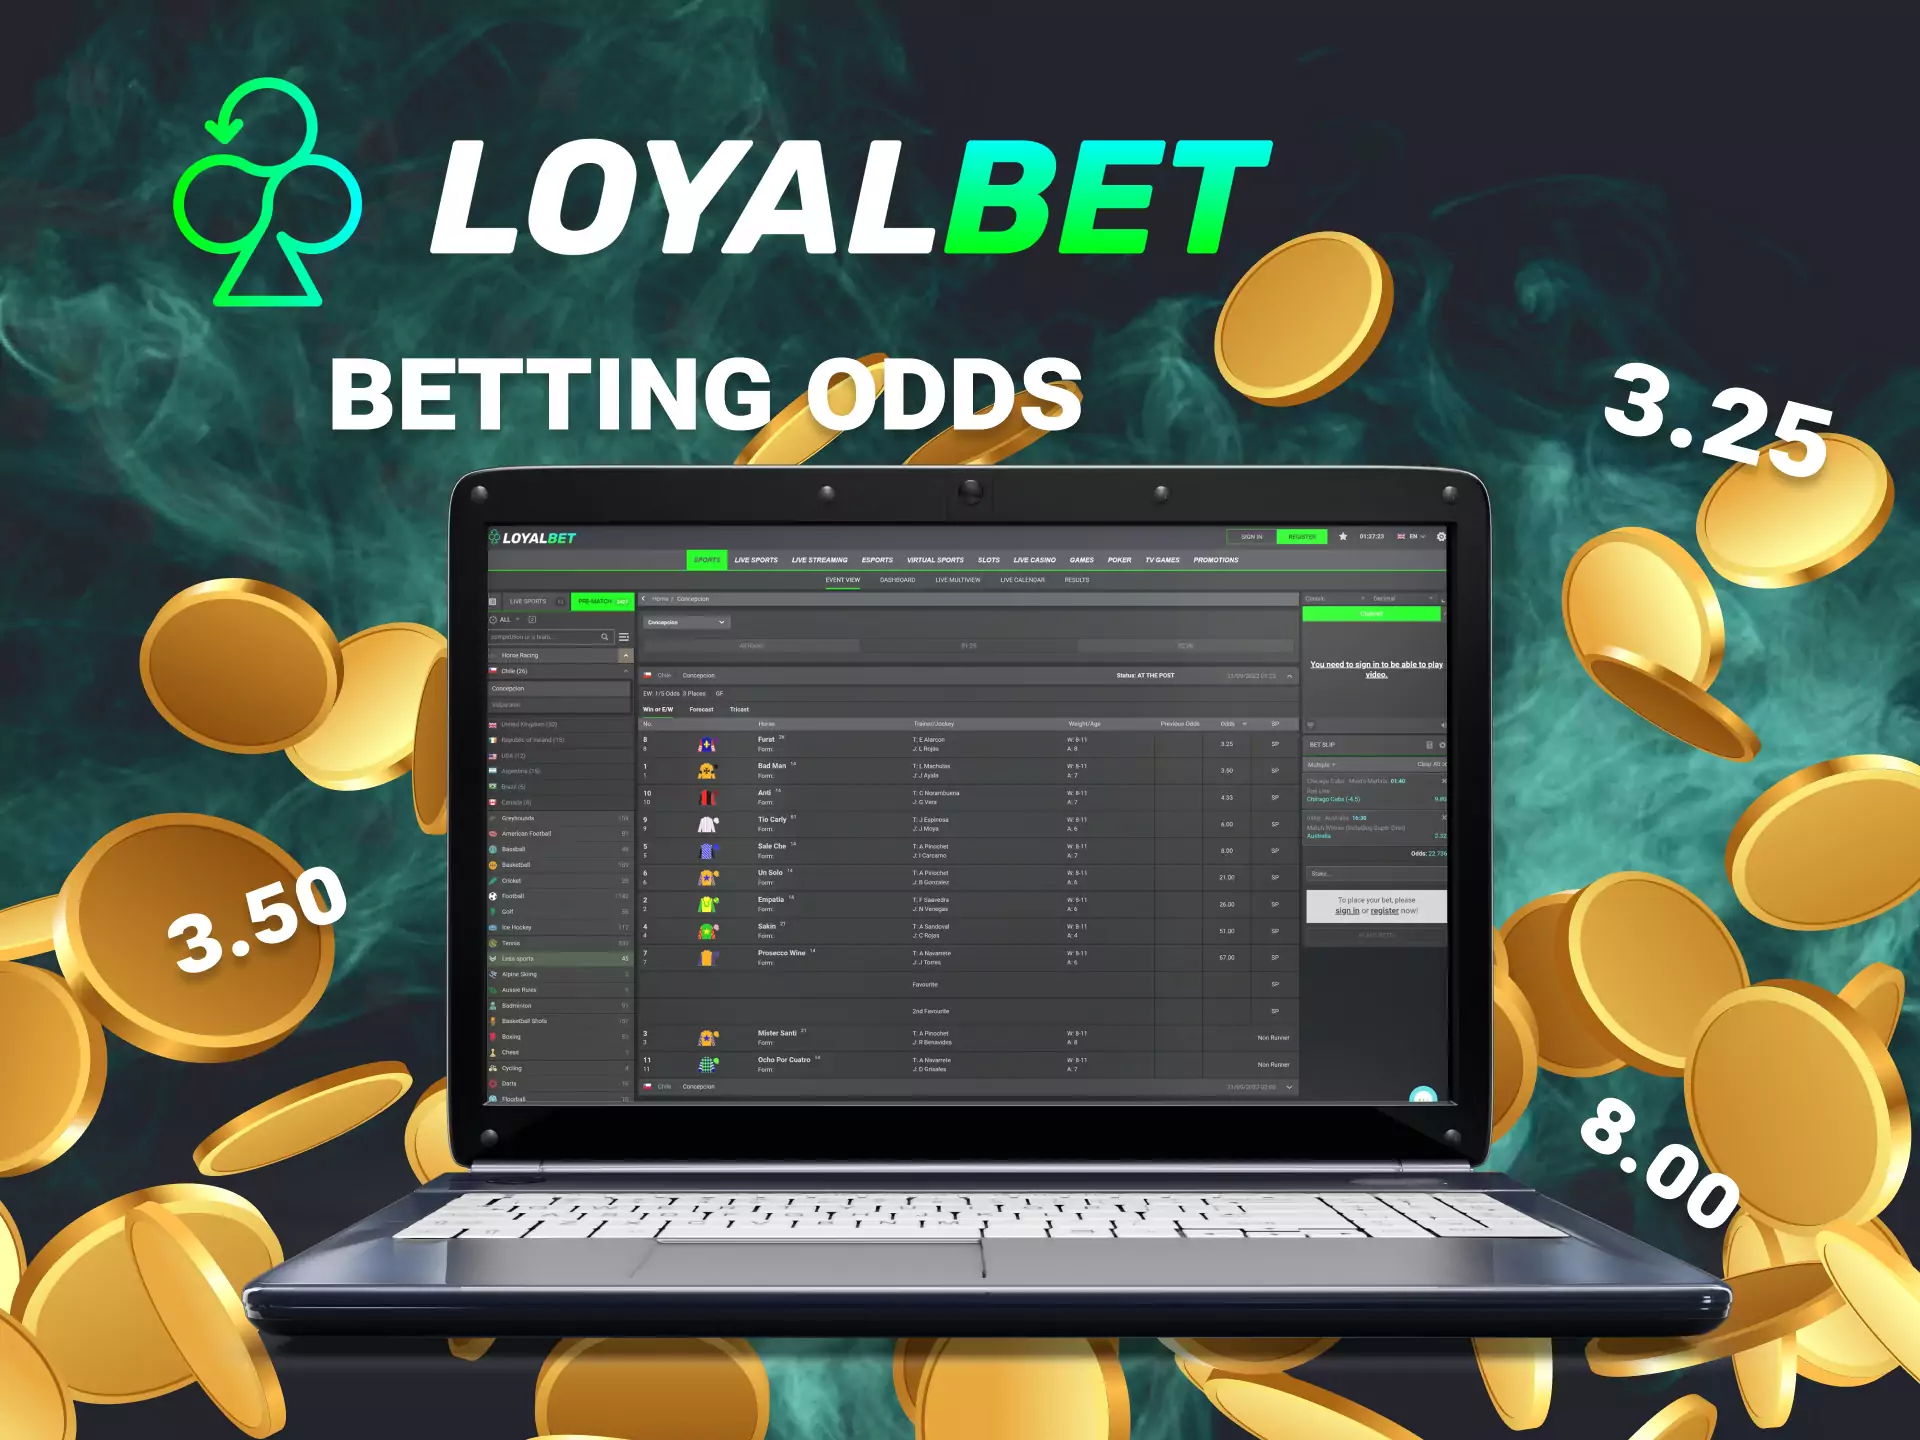 Loyalbet has high odds of betting on sports matches.